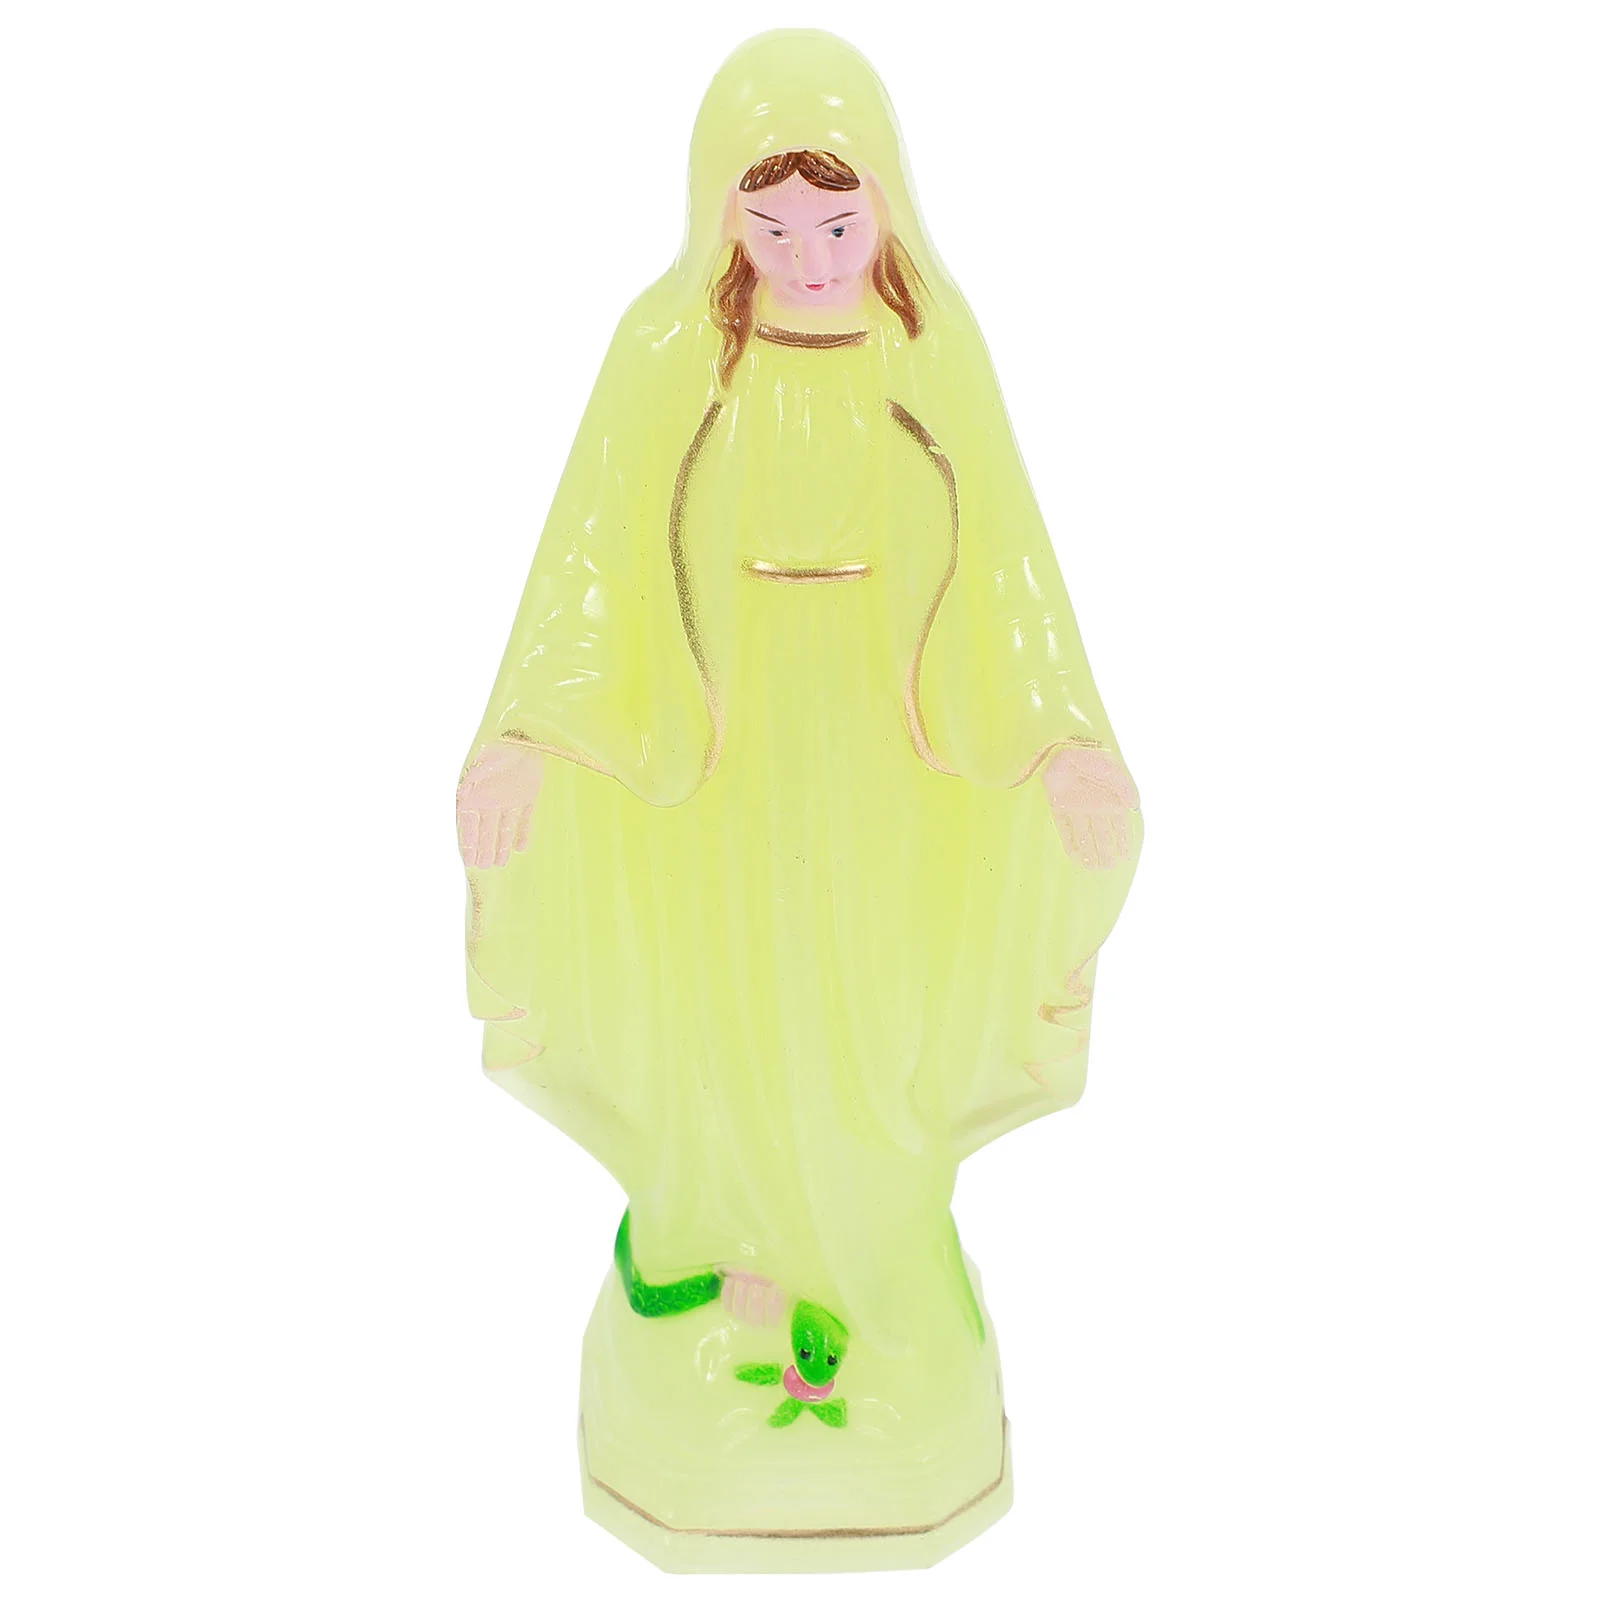 

Our Lady God Ornament Catholicism Church Decoration Religious Style Adornment Plastic Craft